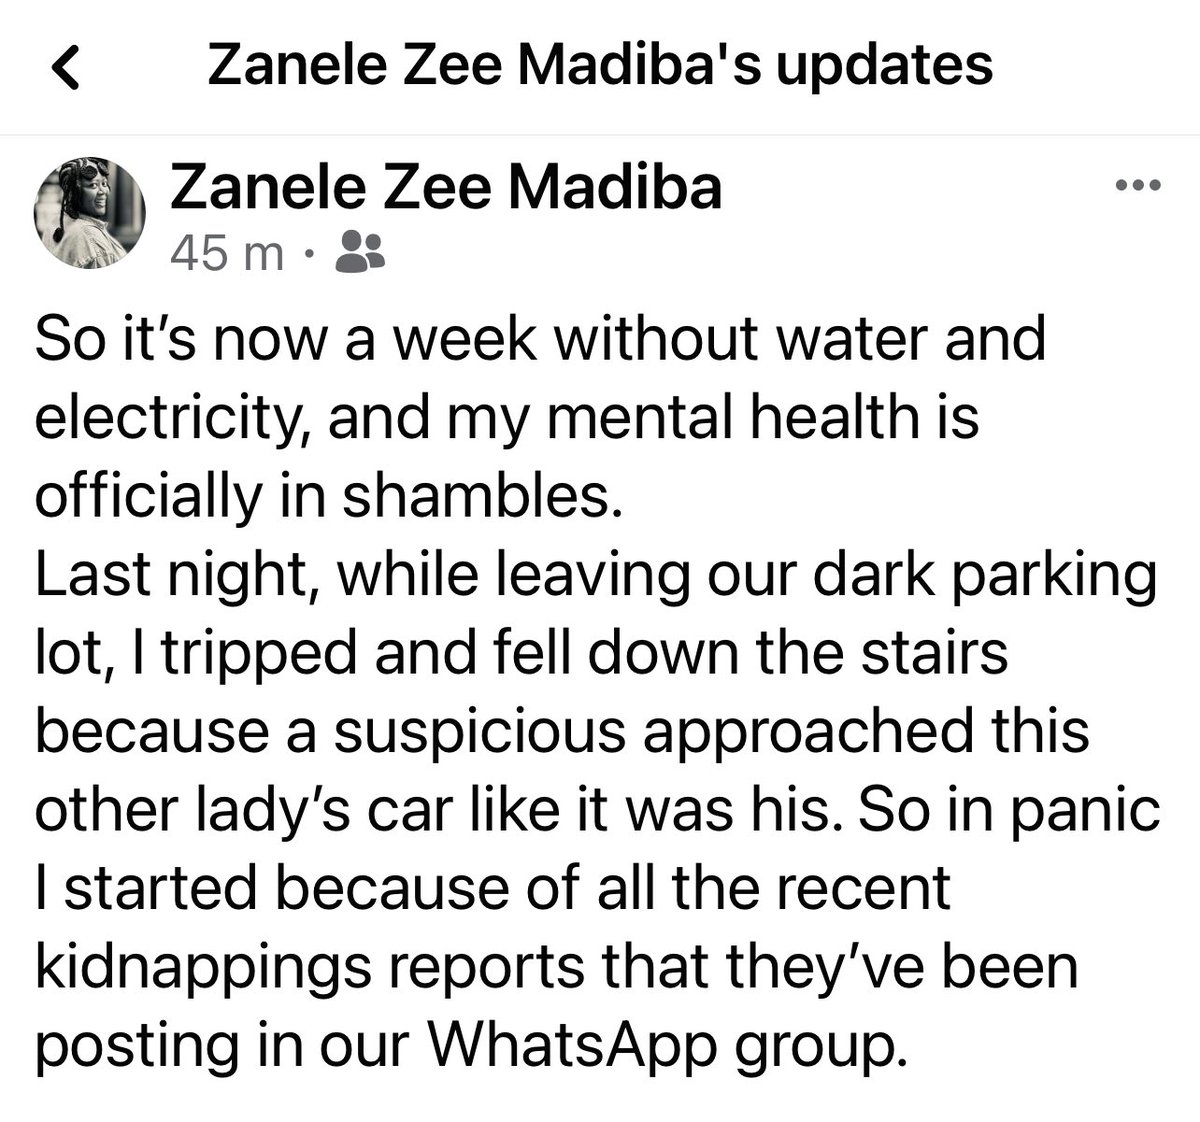 Braamfontein is a crime scene. No electricity. No water. Stolen cables. Student and resident lives stressful. Living in the ANC’s “World Class City” is traumatic. Abuse. #WeNeedNewLeaders